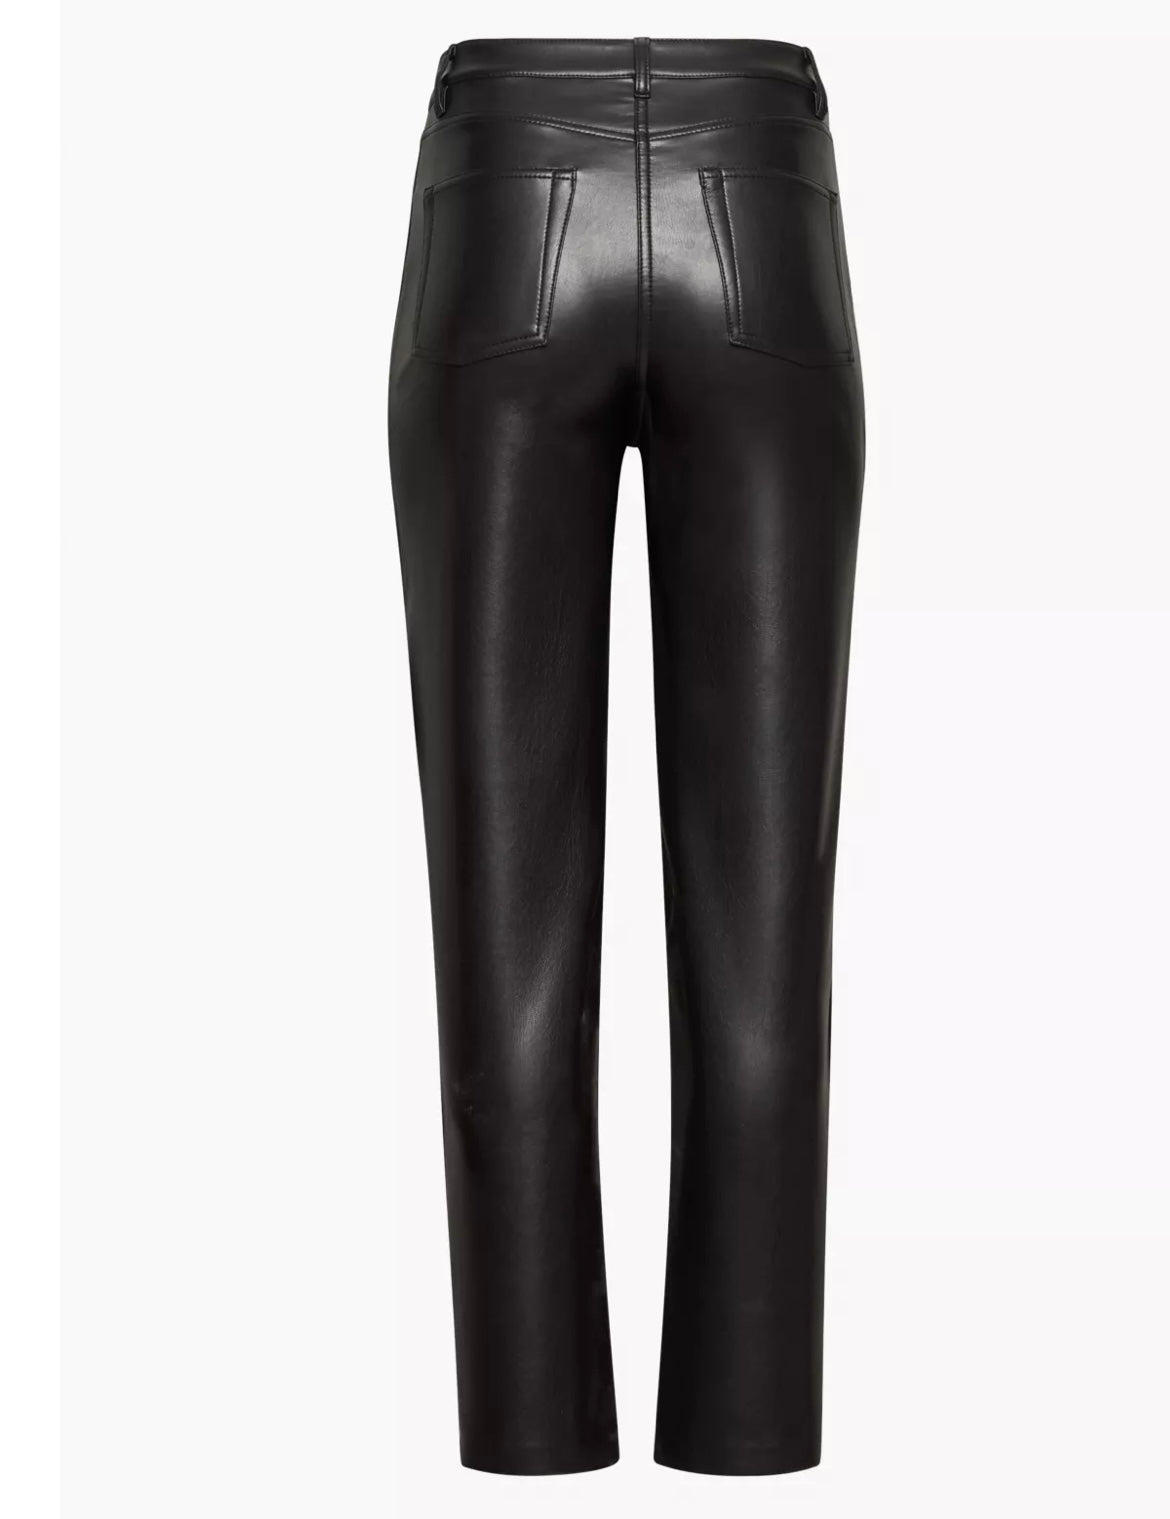 WILFRED leather pants